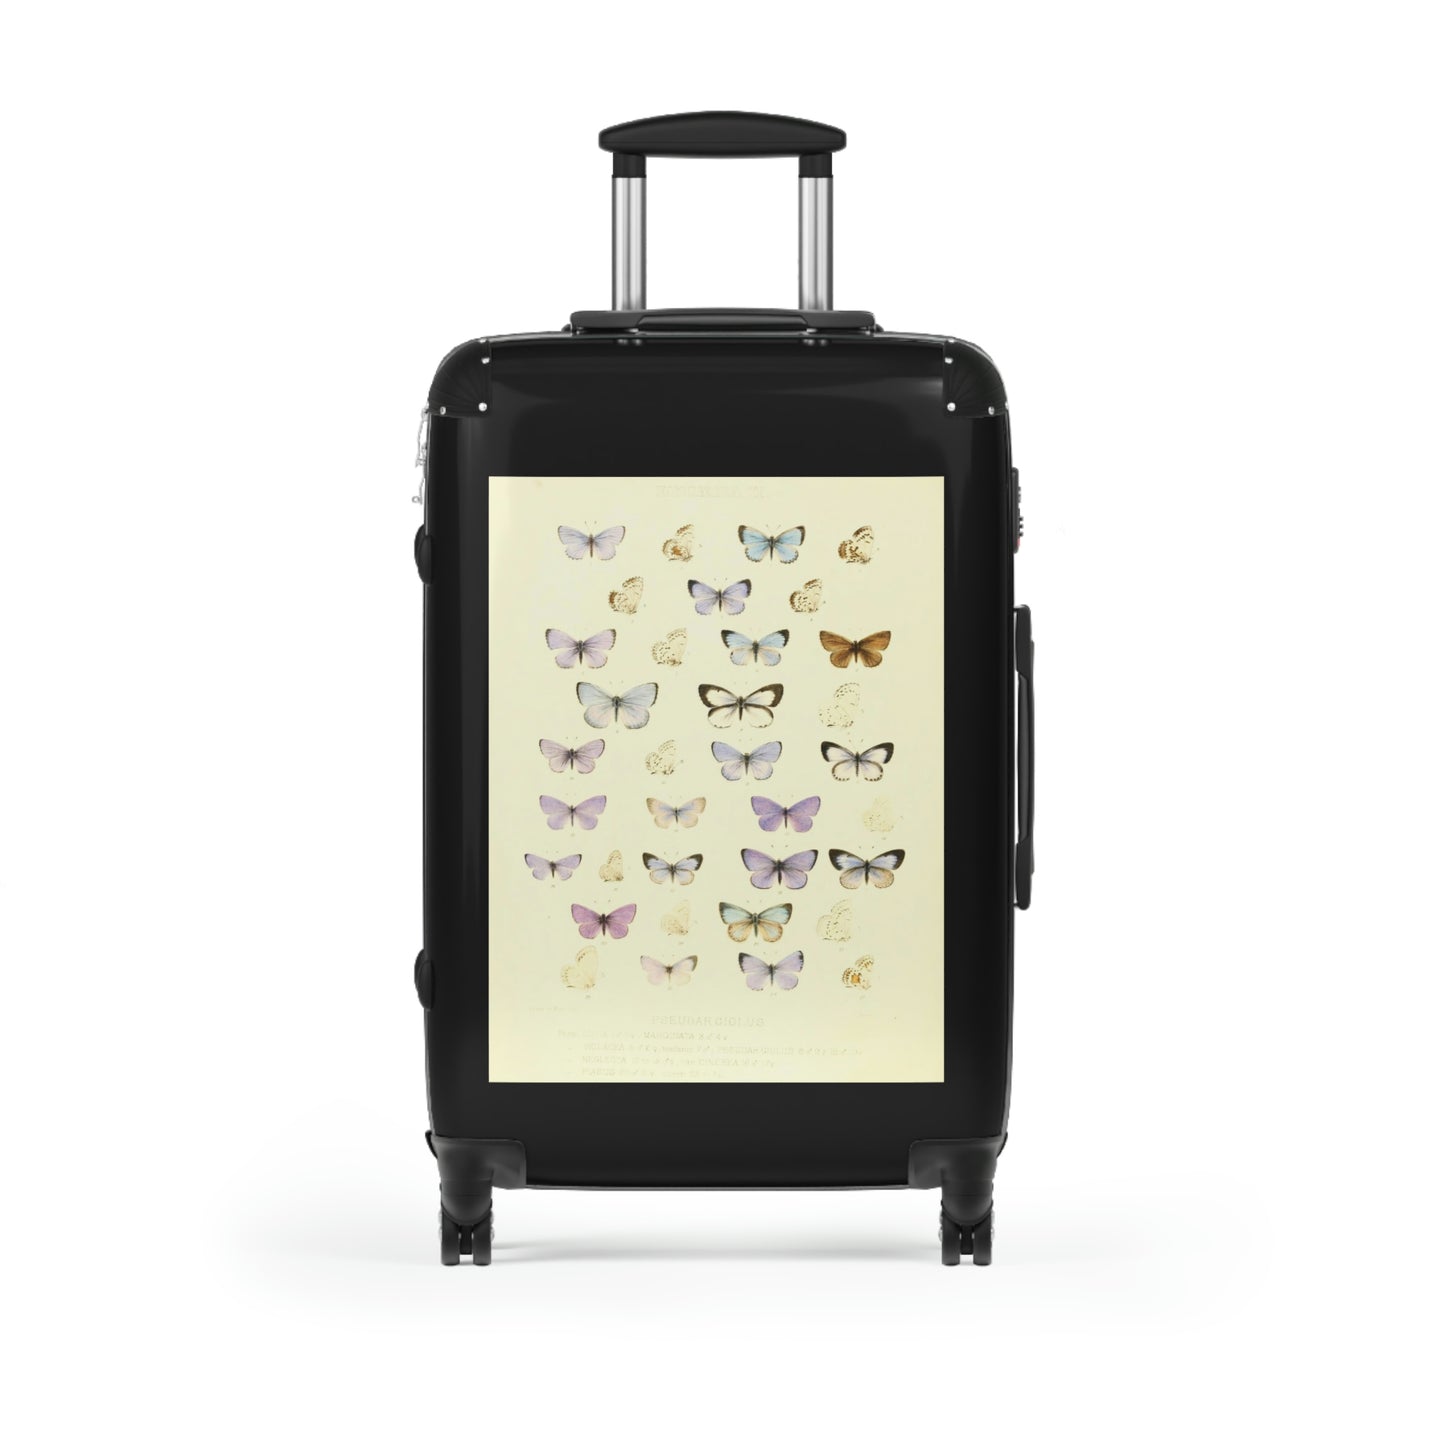 Getrott Butterflies of North America Lycæna Pseudargiolus Lucia Marginata Violocea Pseudar Giolus Neglecta Cinerea Piasus Aberr Cabin Suitcase Carry-On Travel Check Luggage 4-Wheel Spinner Suitcase Bag Multiple Colors and Sizes